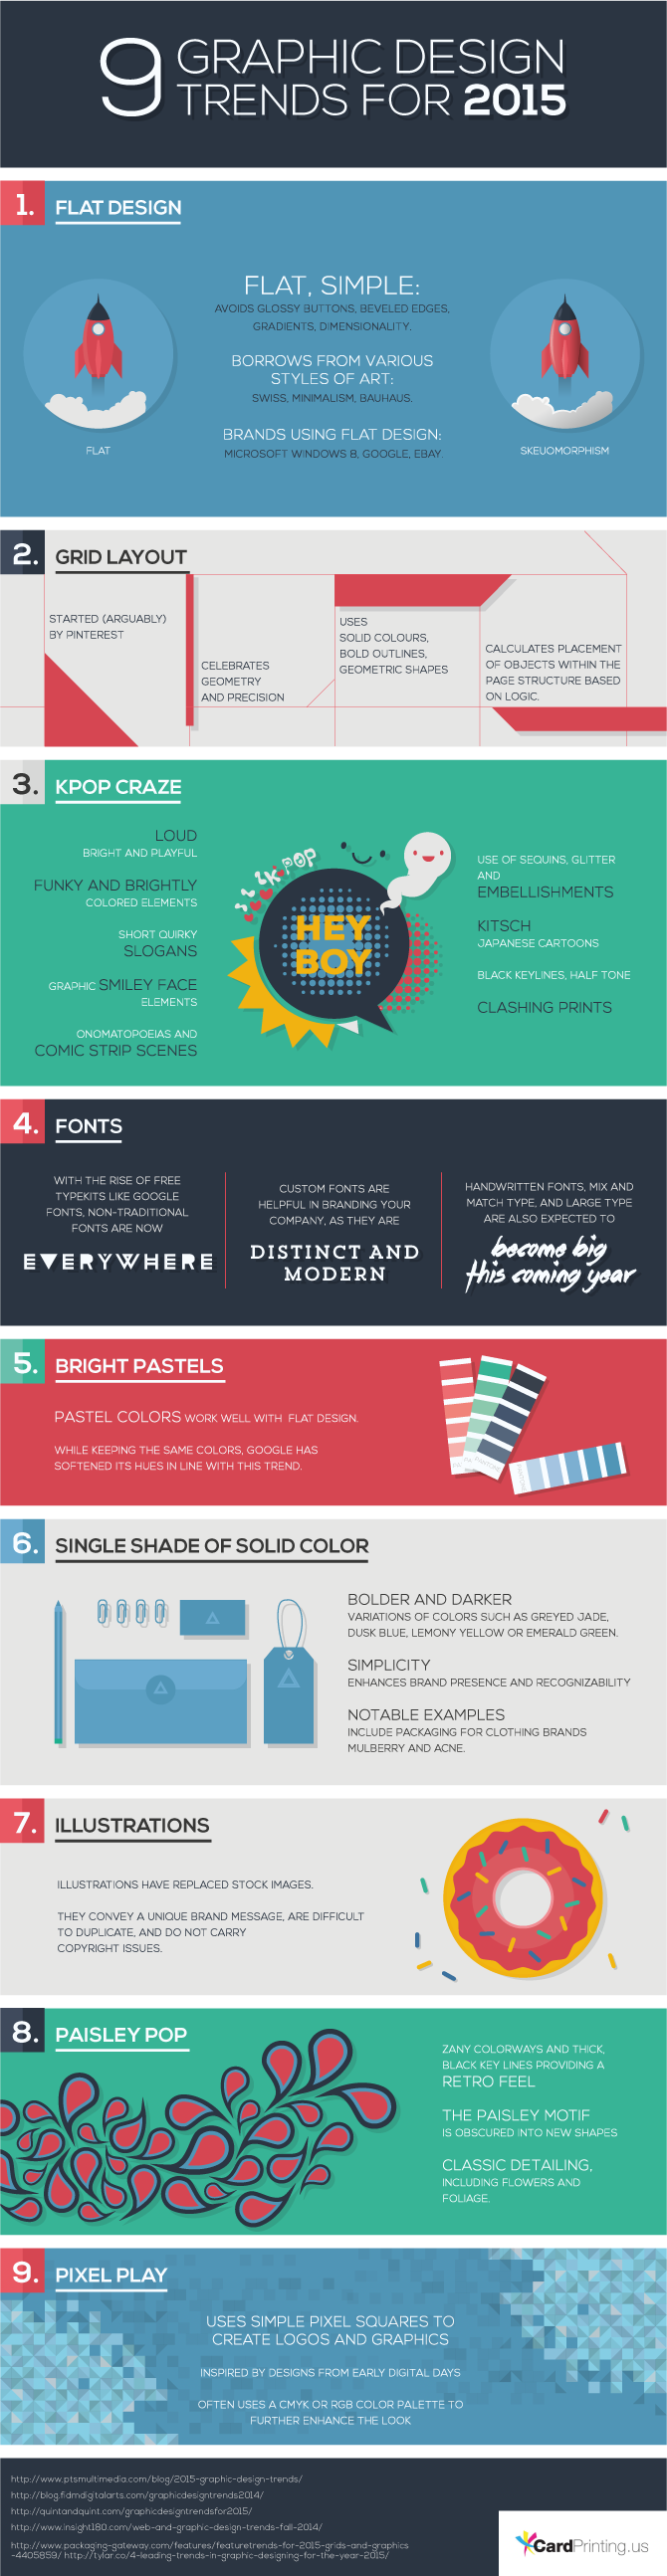 Nine Visual Design Trends for 2015 - #infographic